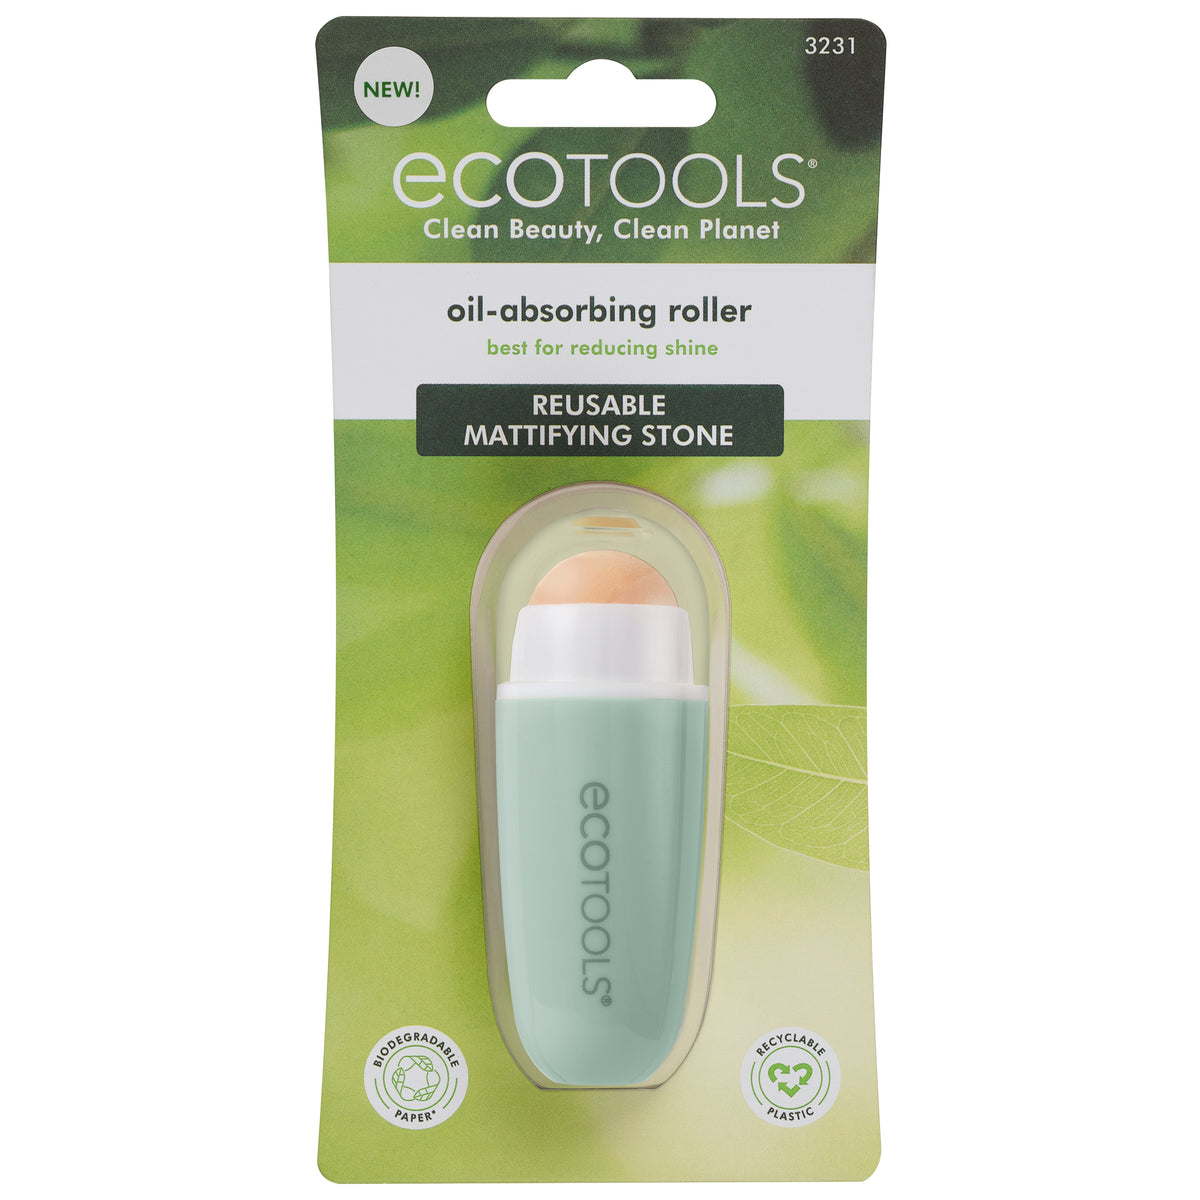 Eco Tools Oil-Absorbing Roller, Reusable Mattifying Stone